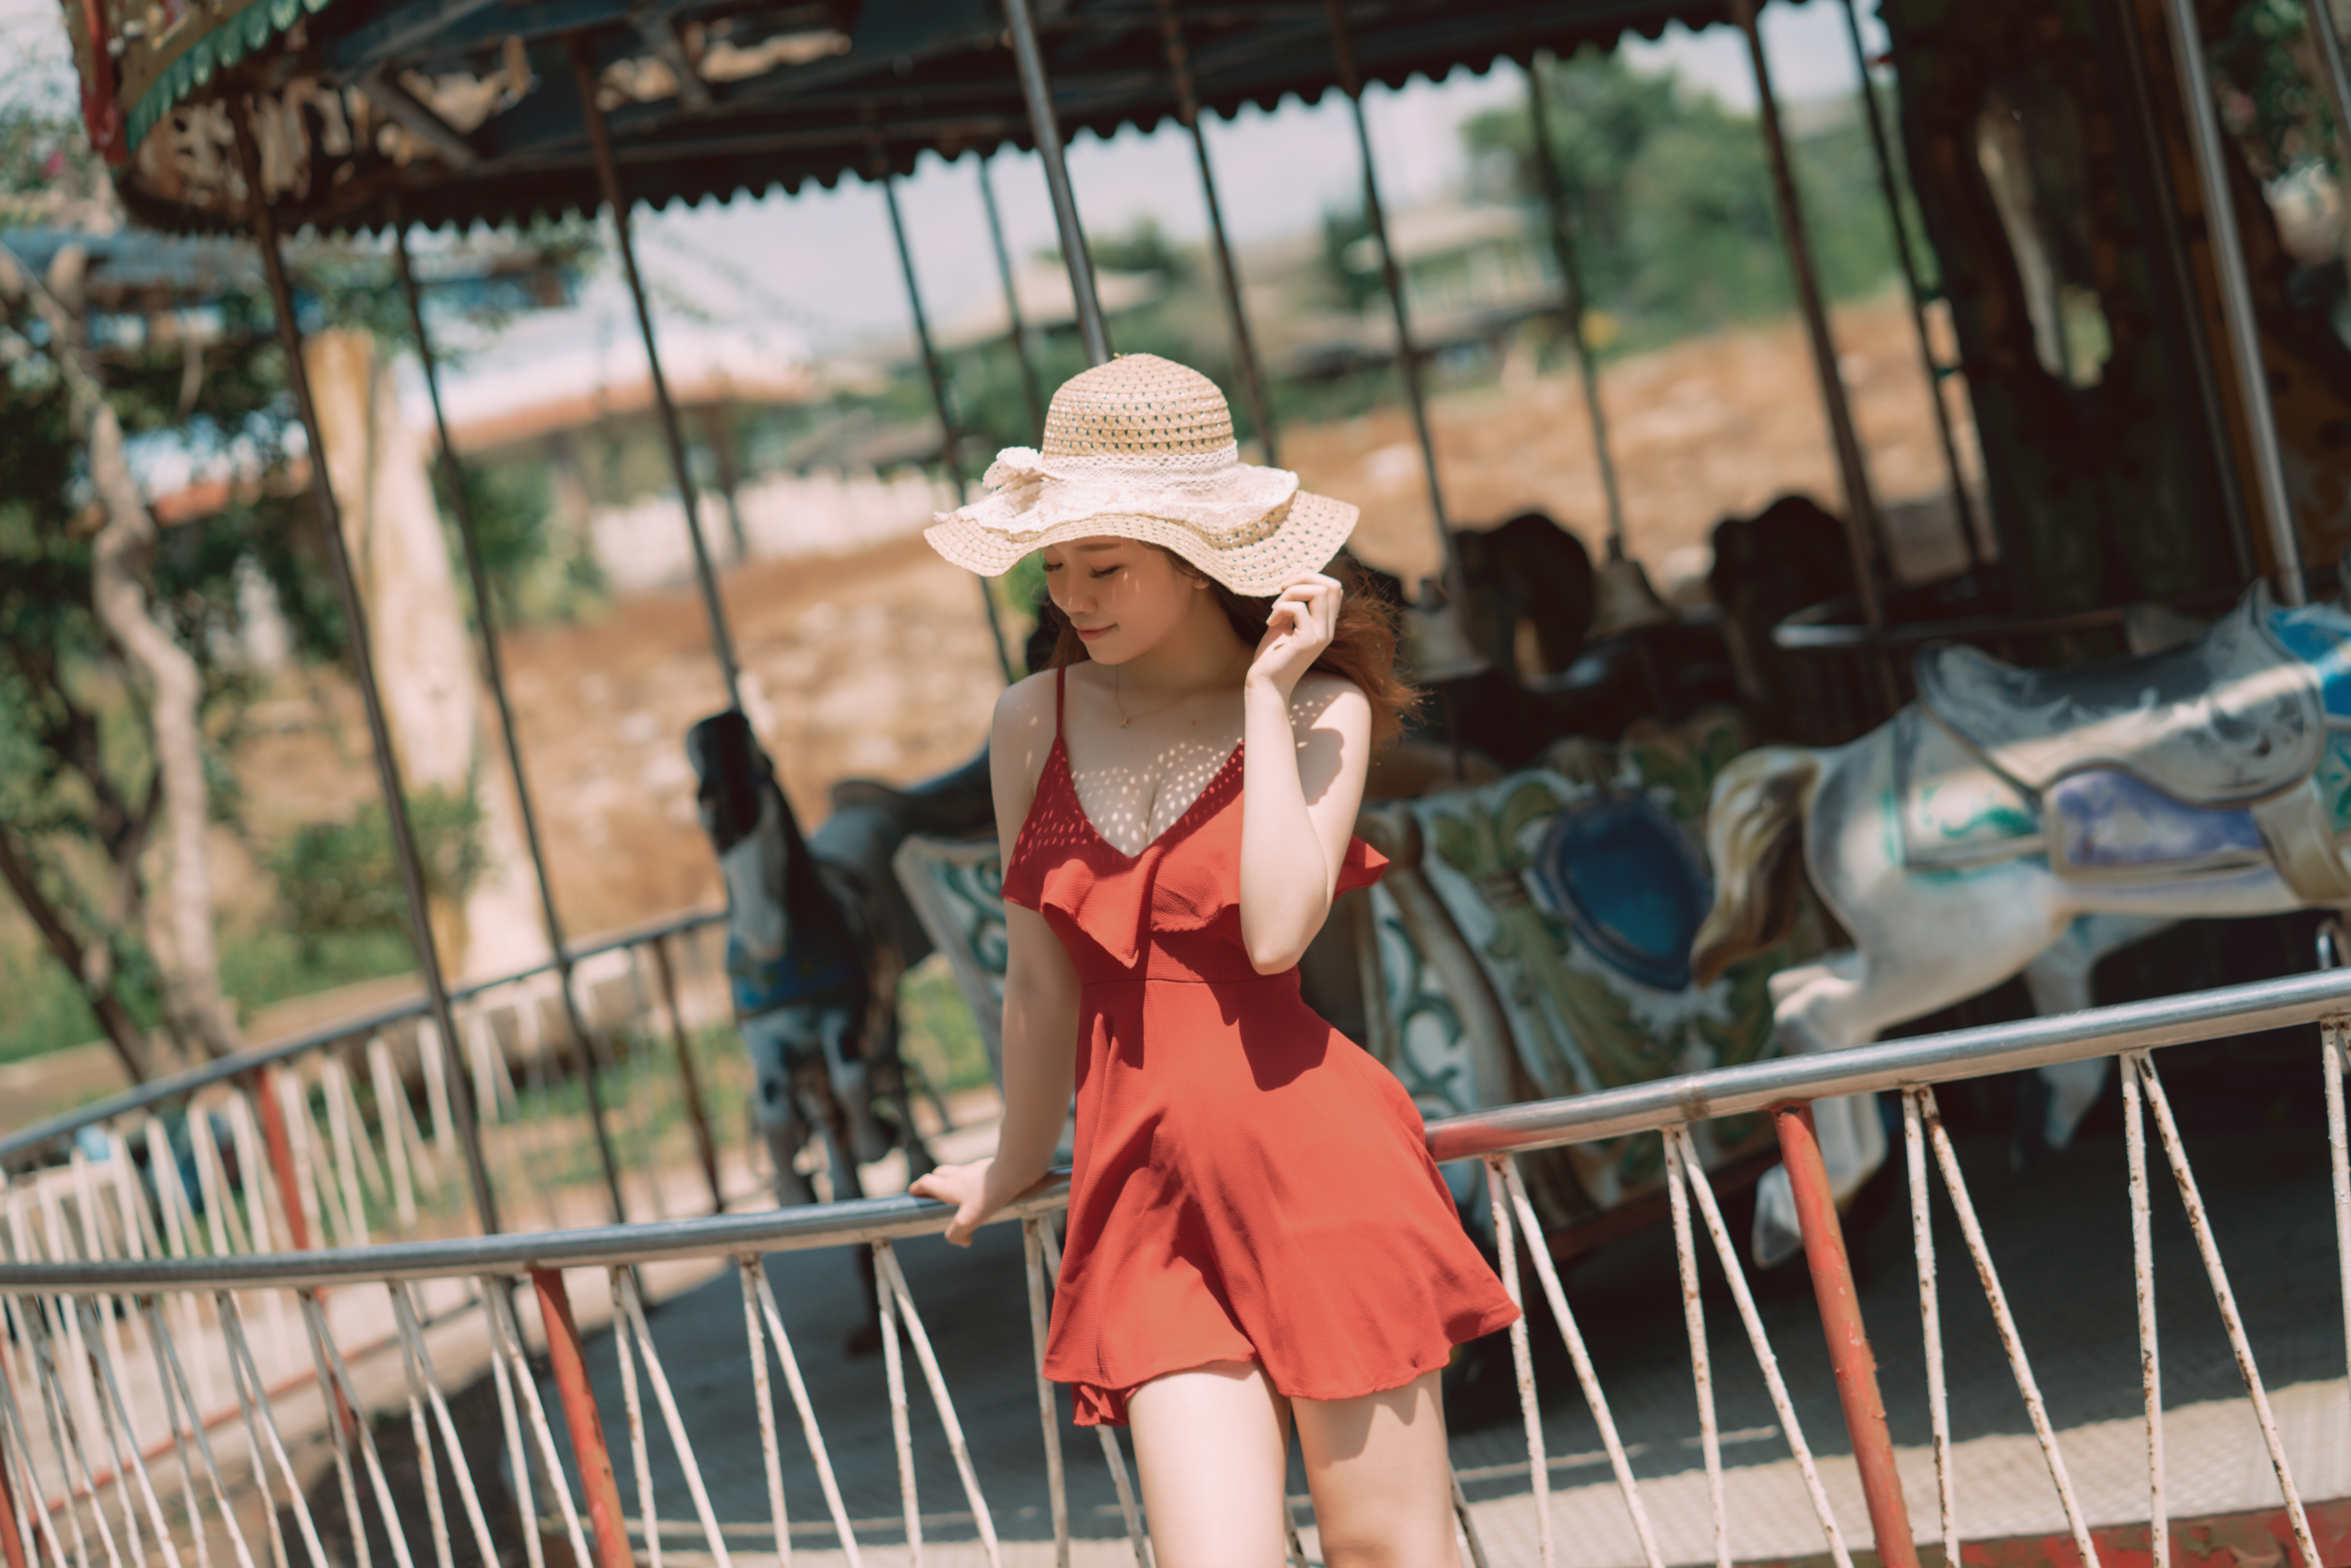 People 3840x2561 Asian women model brunette portrait women with hats hat necklace closed eyes smiling cleavage dress railing carousels outdoors women outdoors